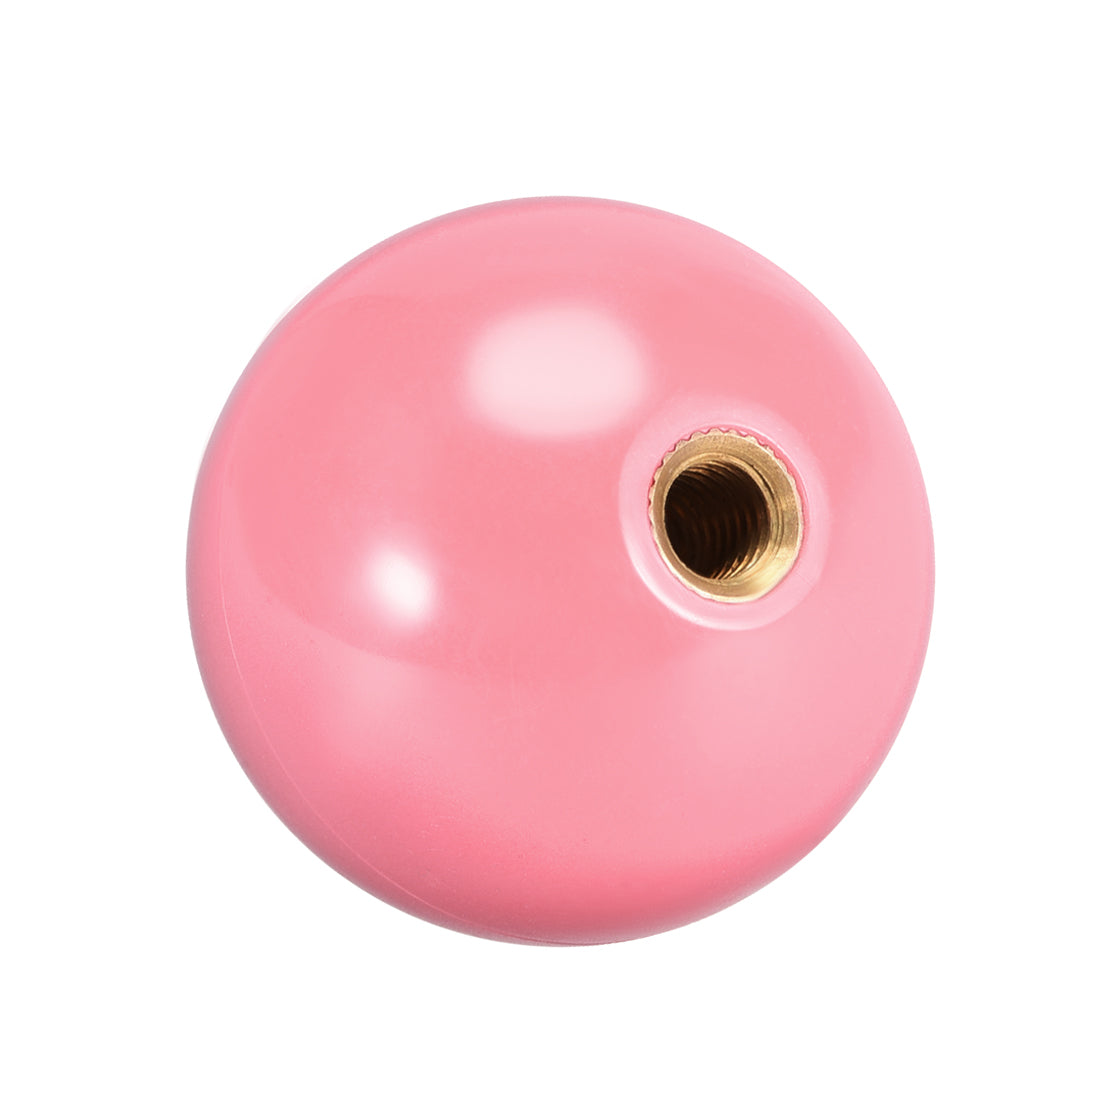 uxcell Uxcell Joystick Ball Top Handle Rocker Round Head Arcade Fighting Game DIY Parts Replacement Pink